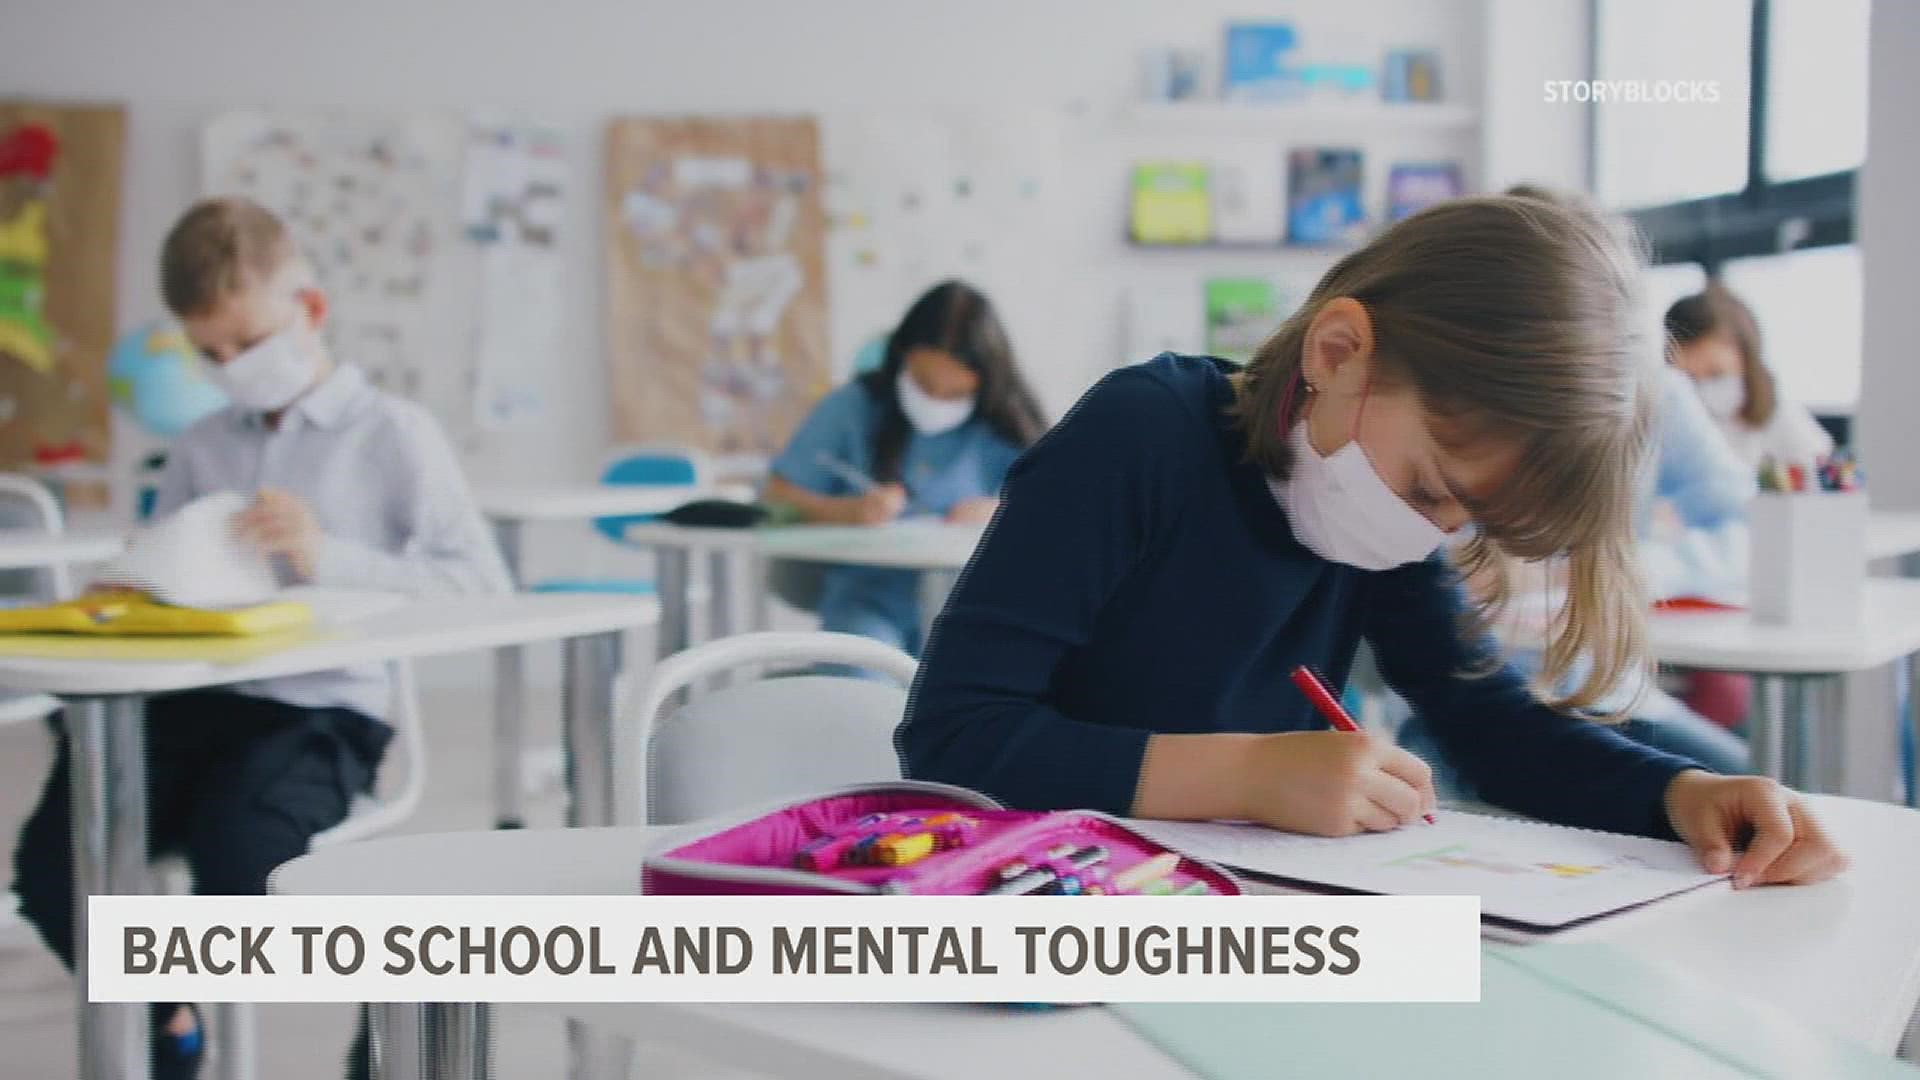 Mental Toughness Expert, Eric Rittmeyer, joined FOX43 on Aug. 20 to discuss how kids can stay mentally tough as they transition back to in-person learning.